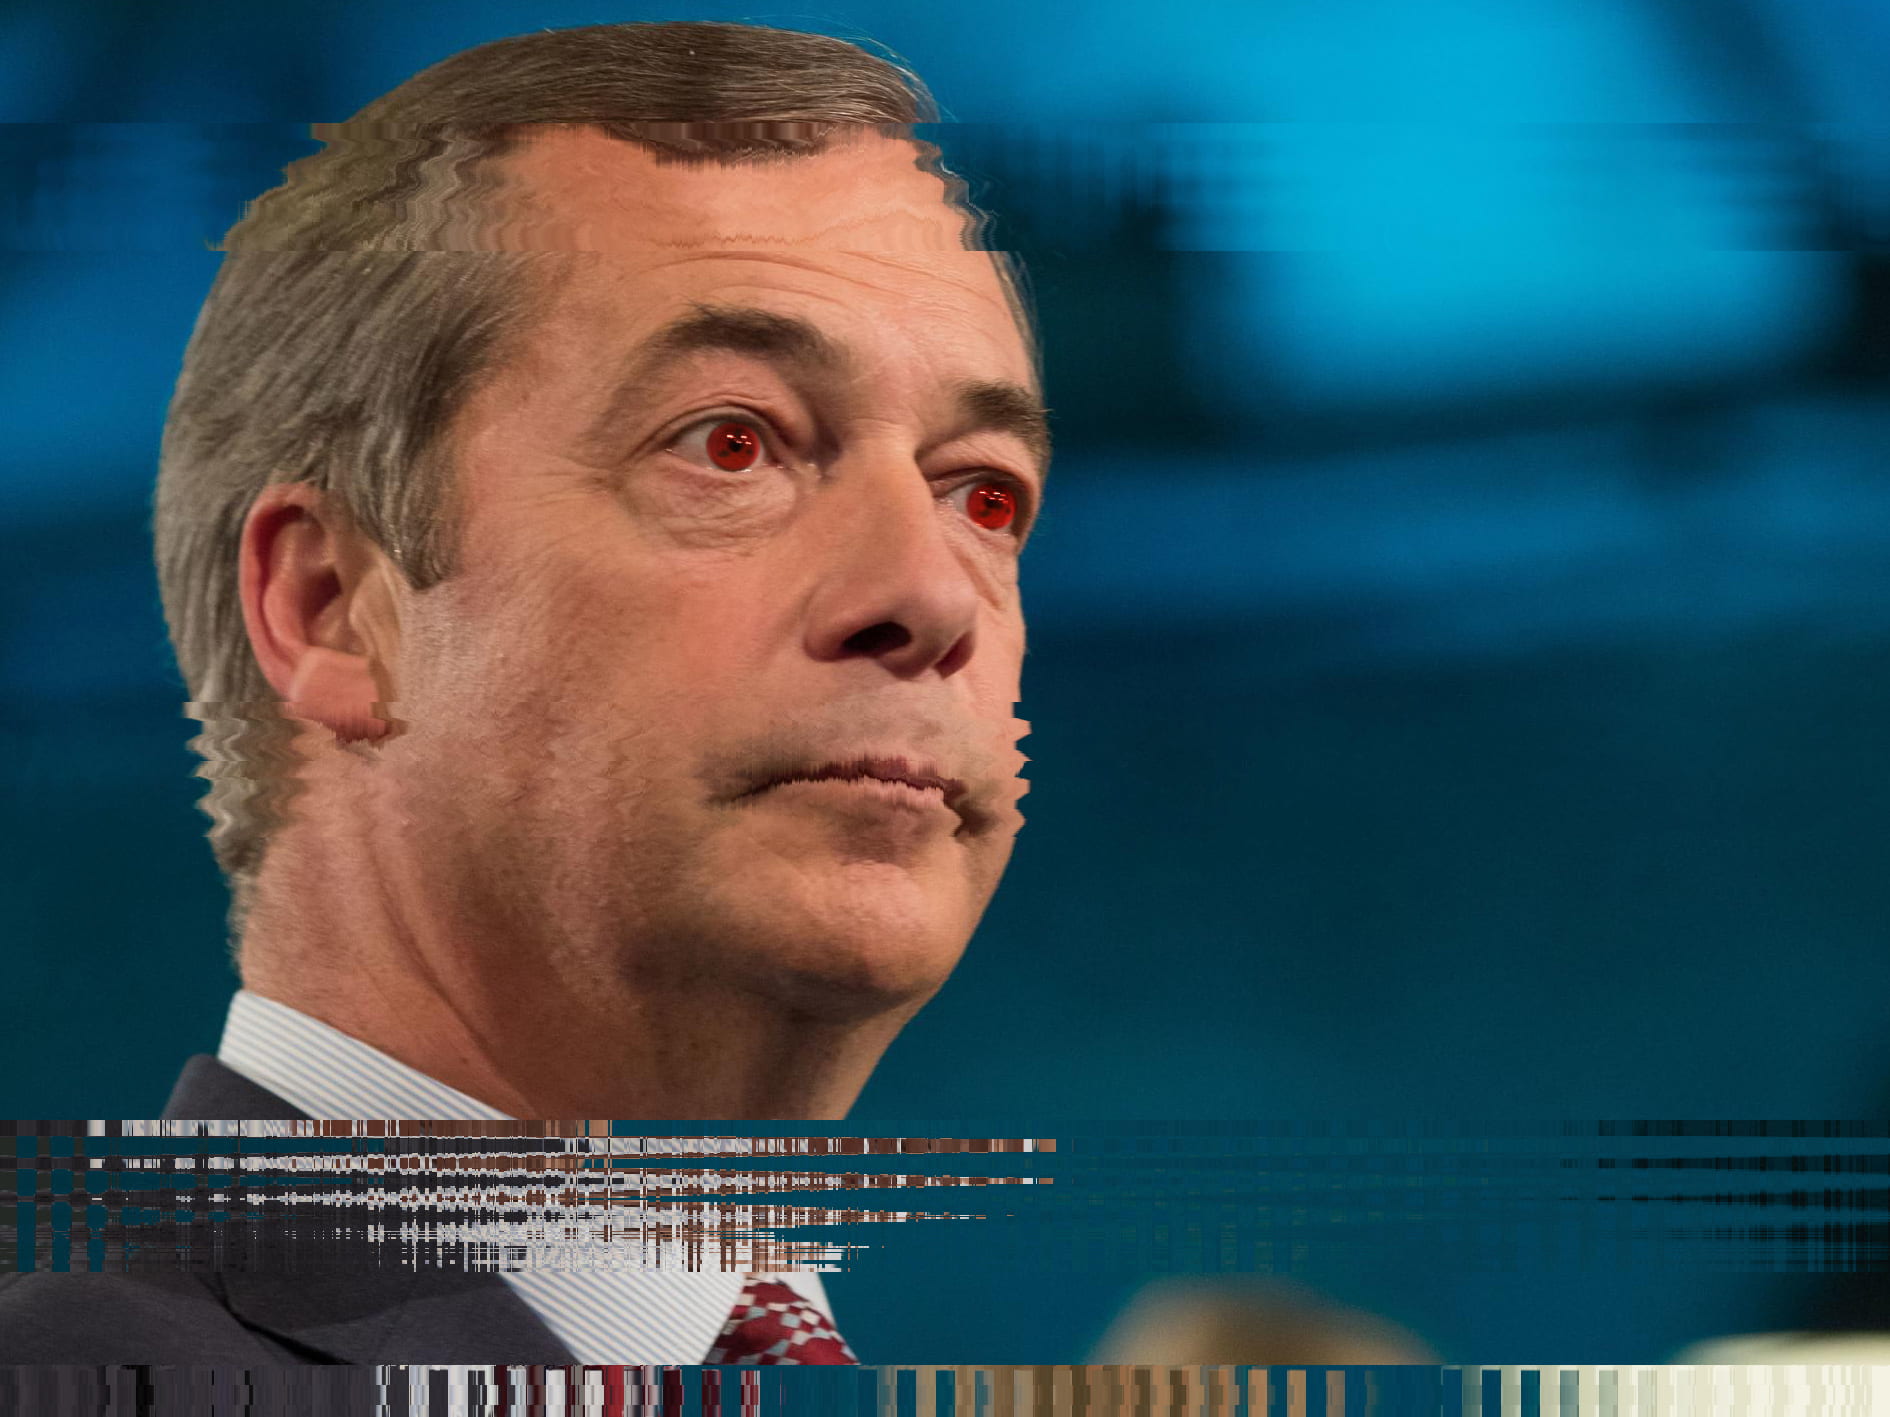 Glitched still-image of Nigel Farage, with red, glowing eyes.